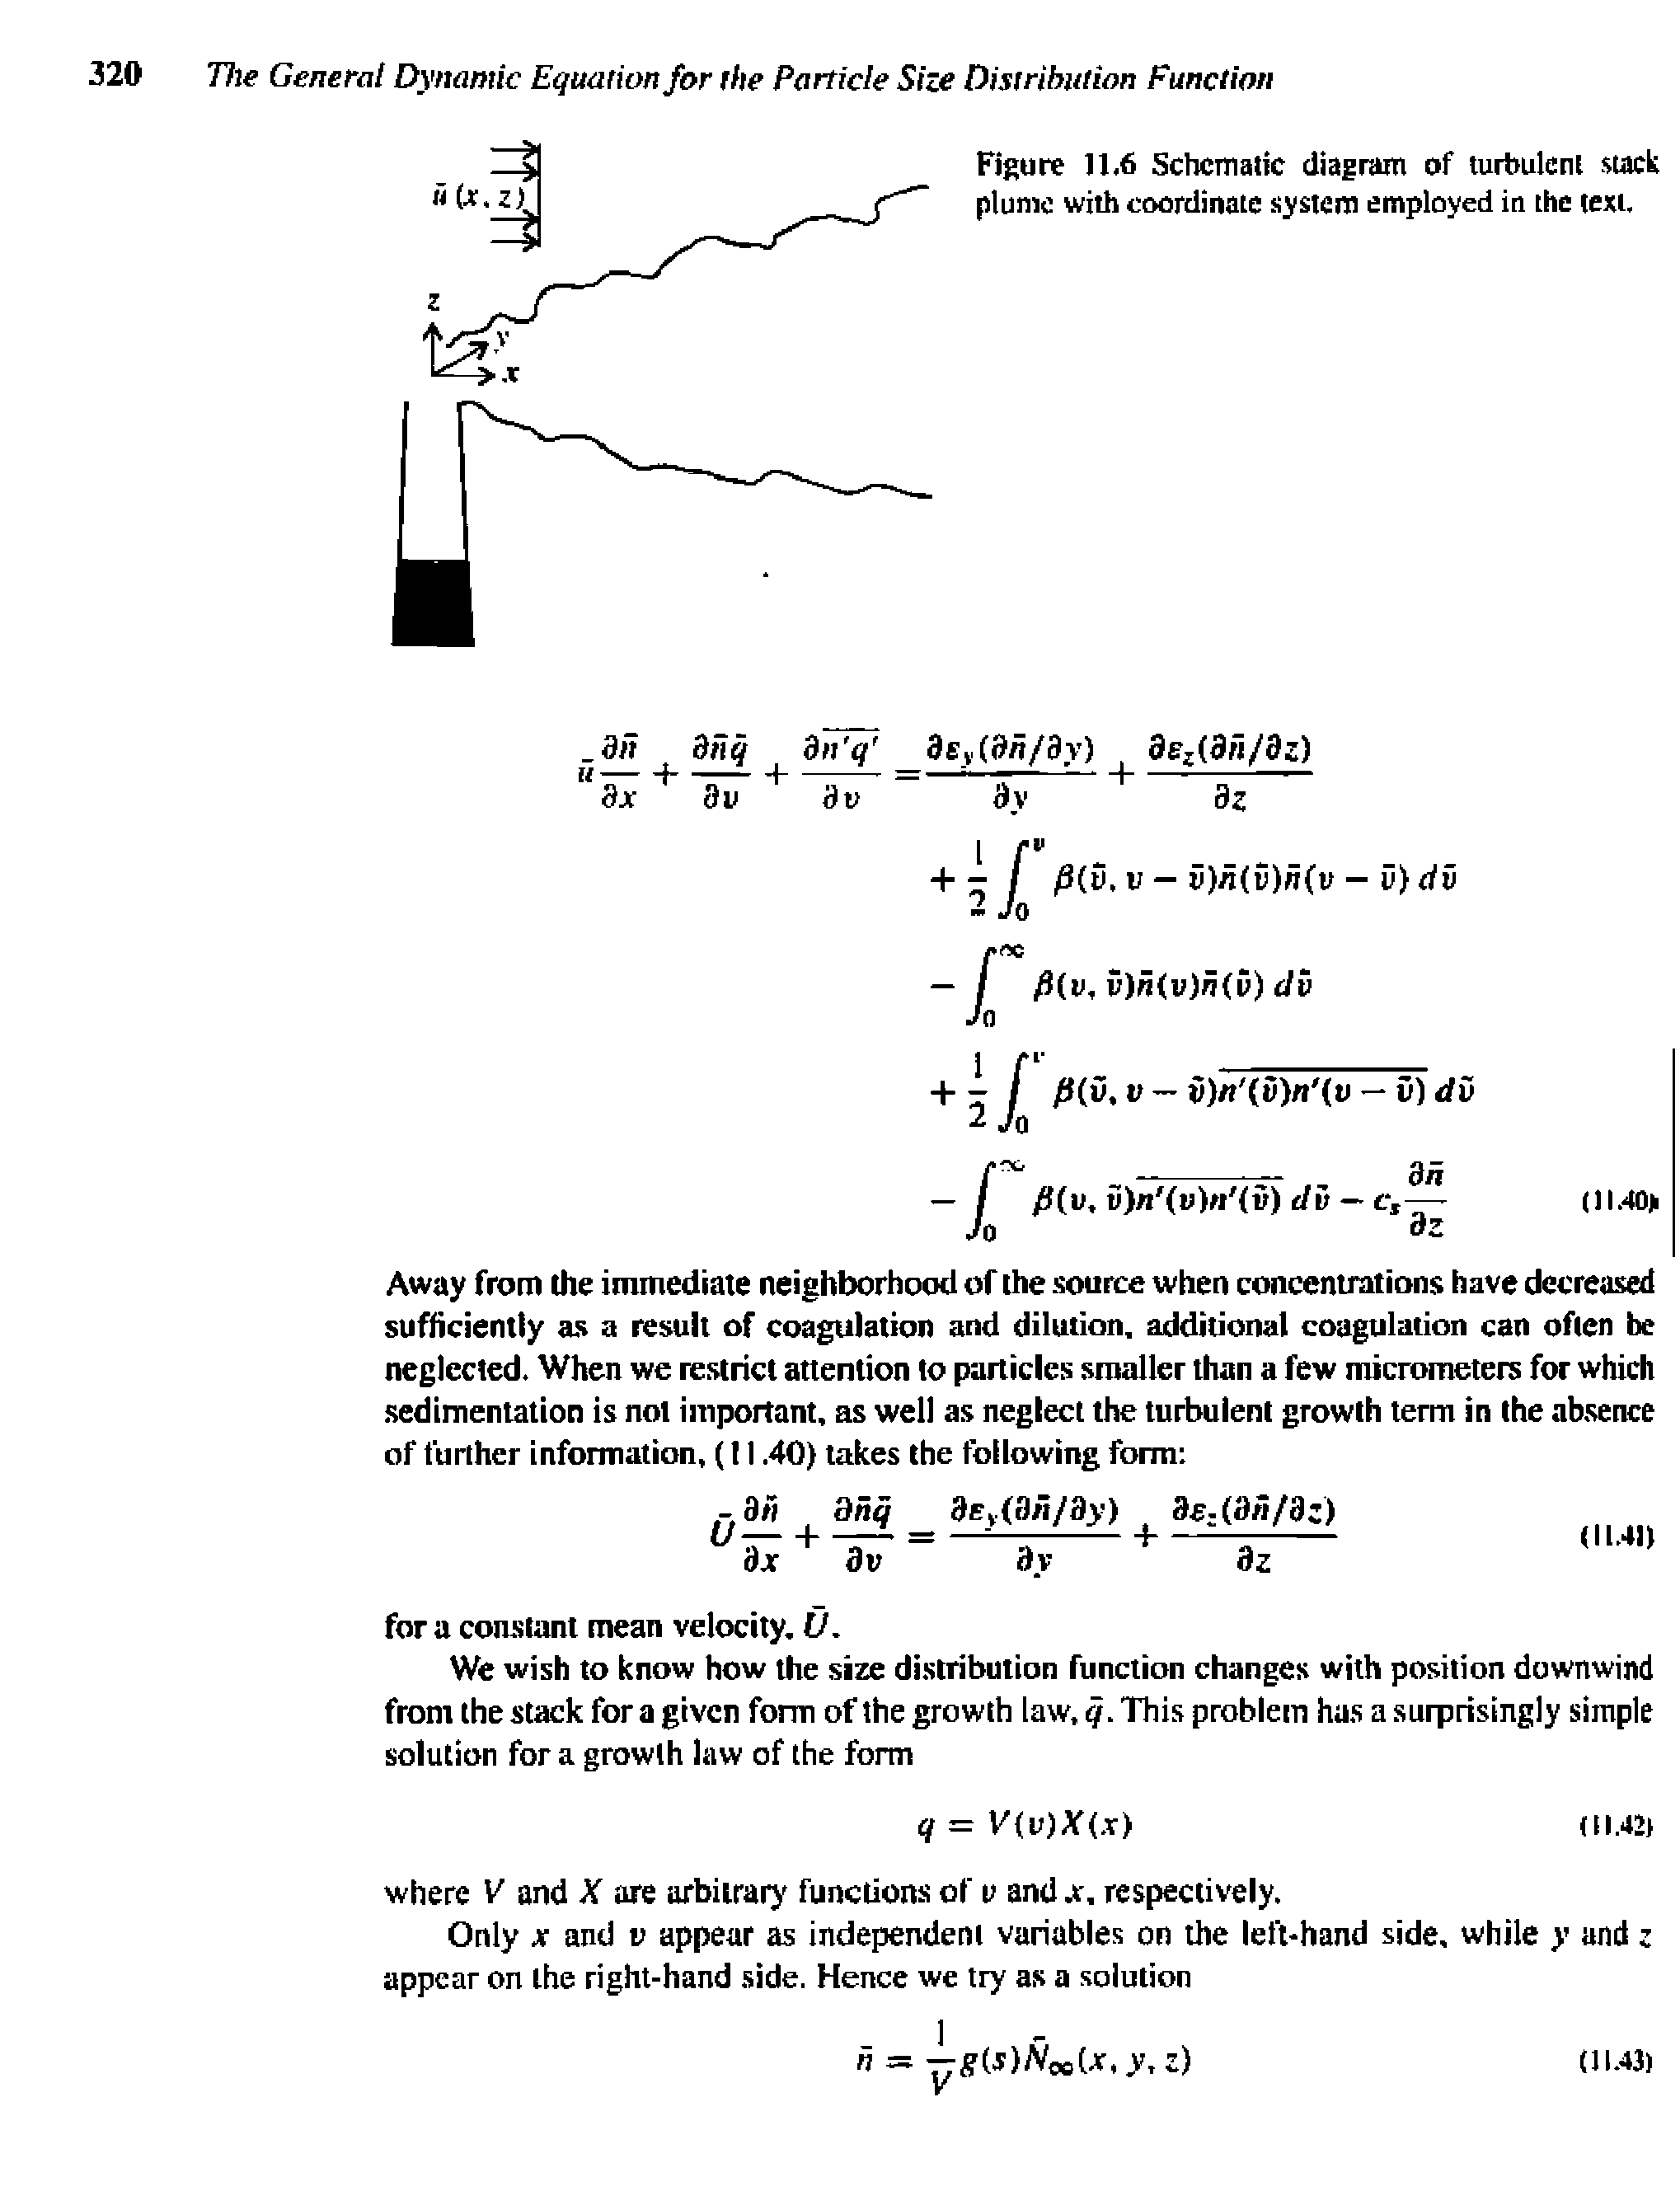 Figure 11,6 Schematic diagram of turbulent stack plume with coordinate system employed in the text.